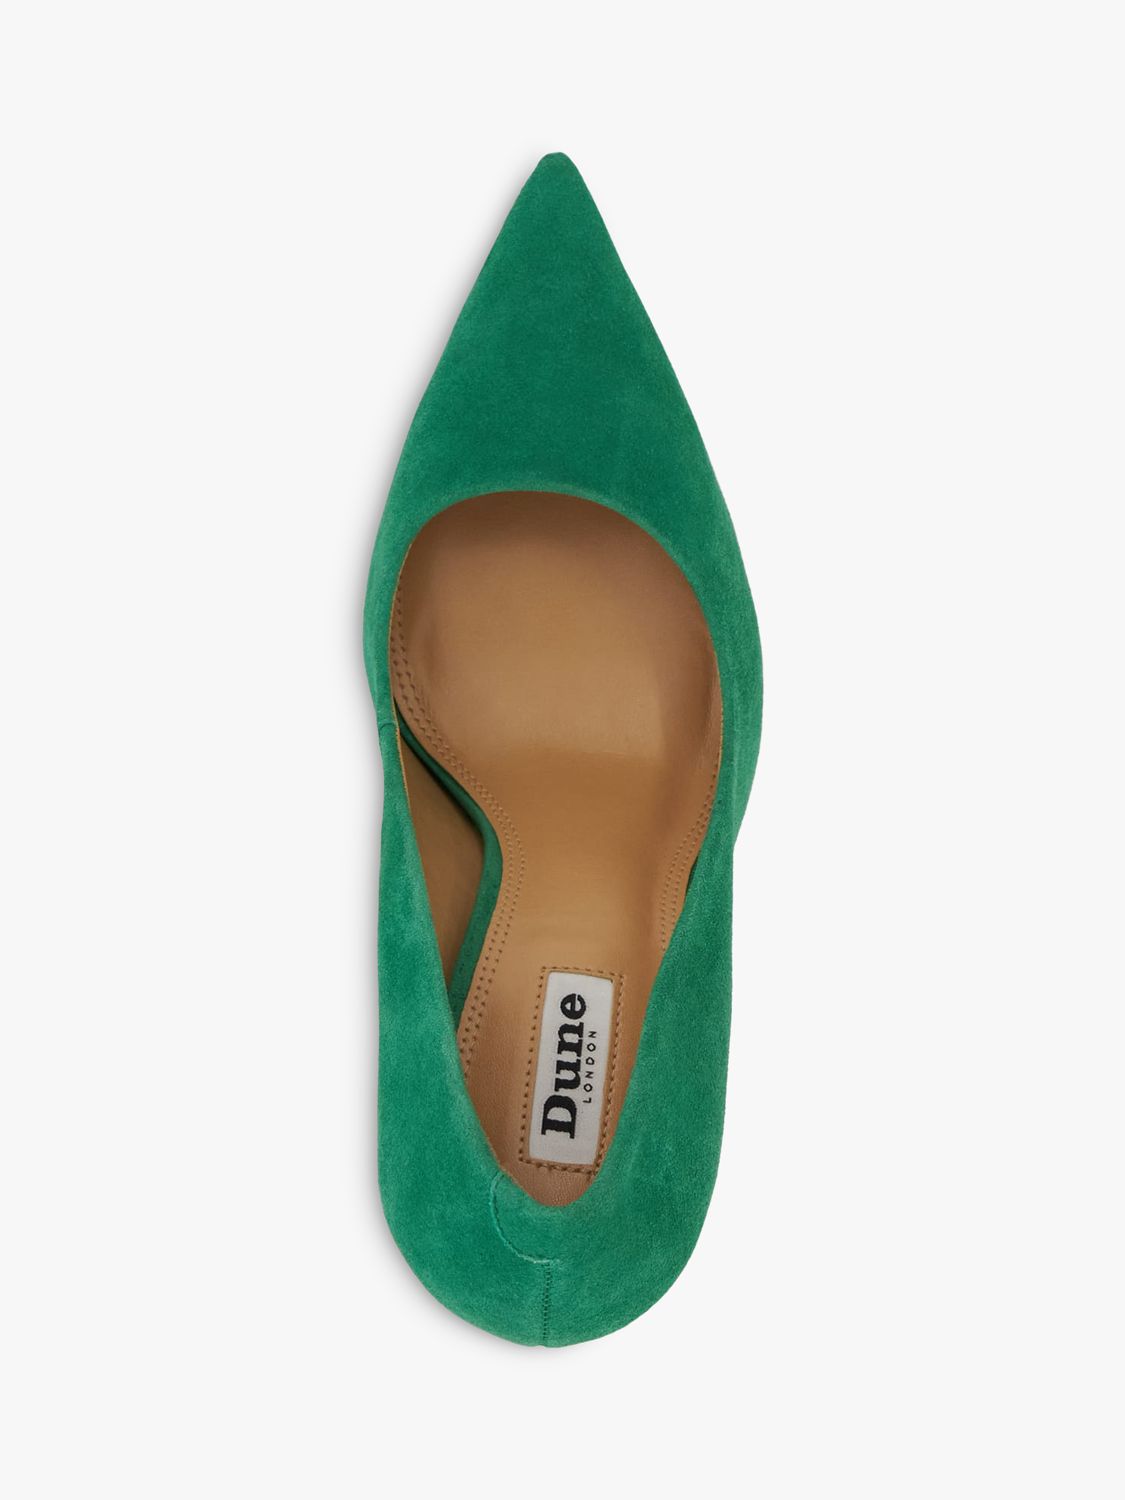 Dune Bento Suede Court Shoes, Green at John Lewis & Partners